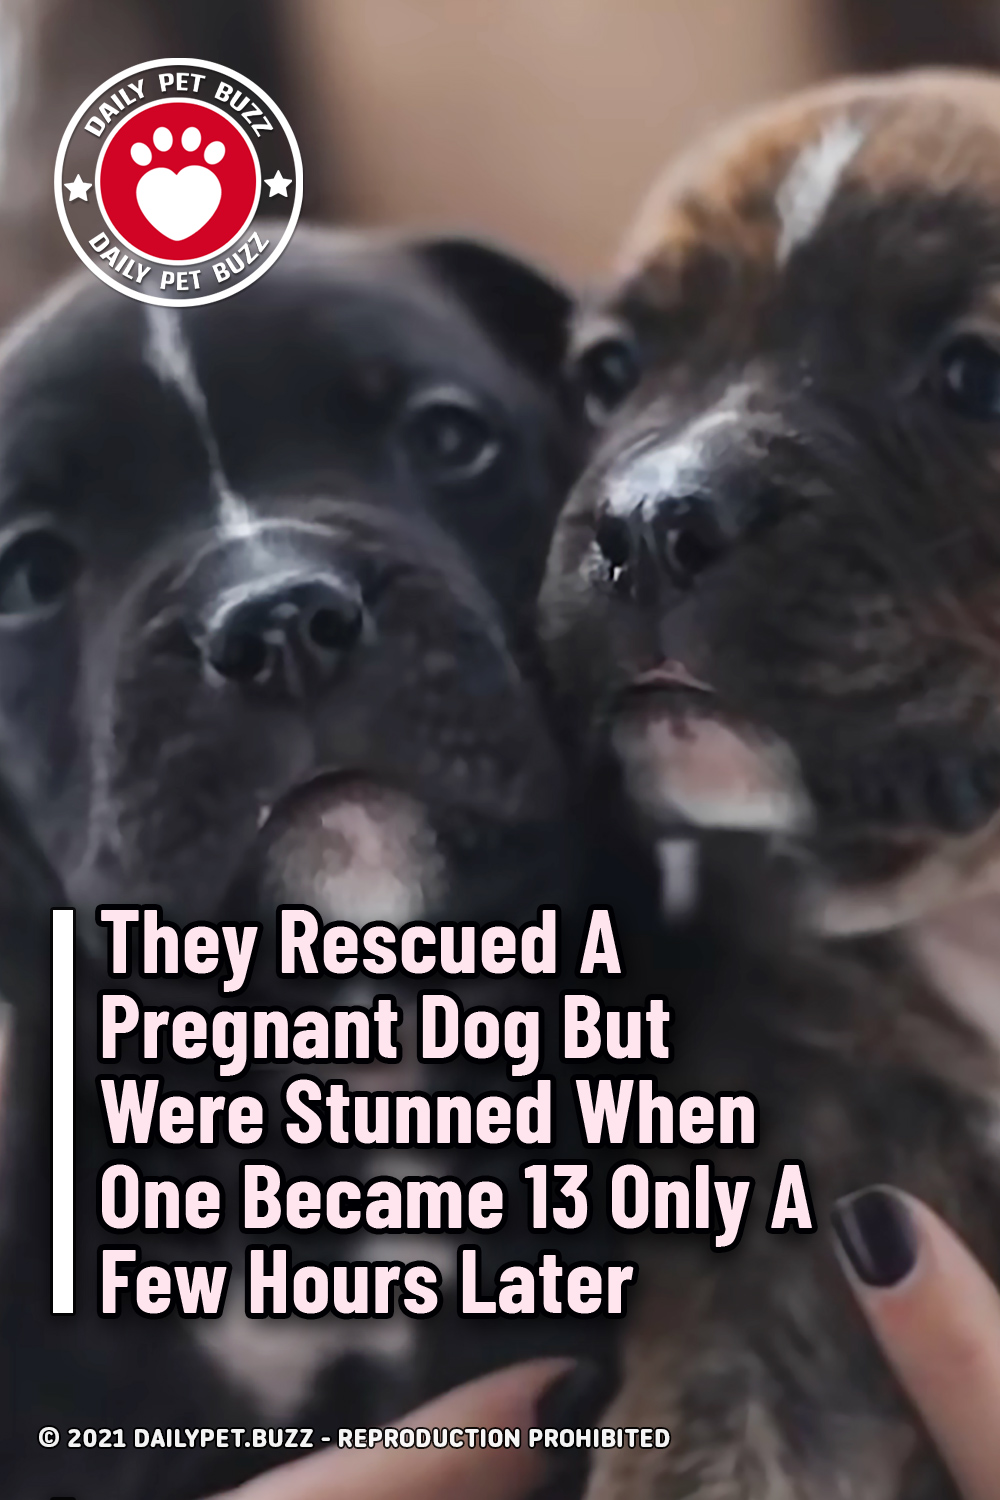 They Rescued A Pregnant Dog But Were Stunned When One Became 13 Only A Few Hours Later